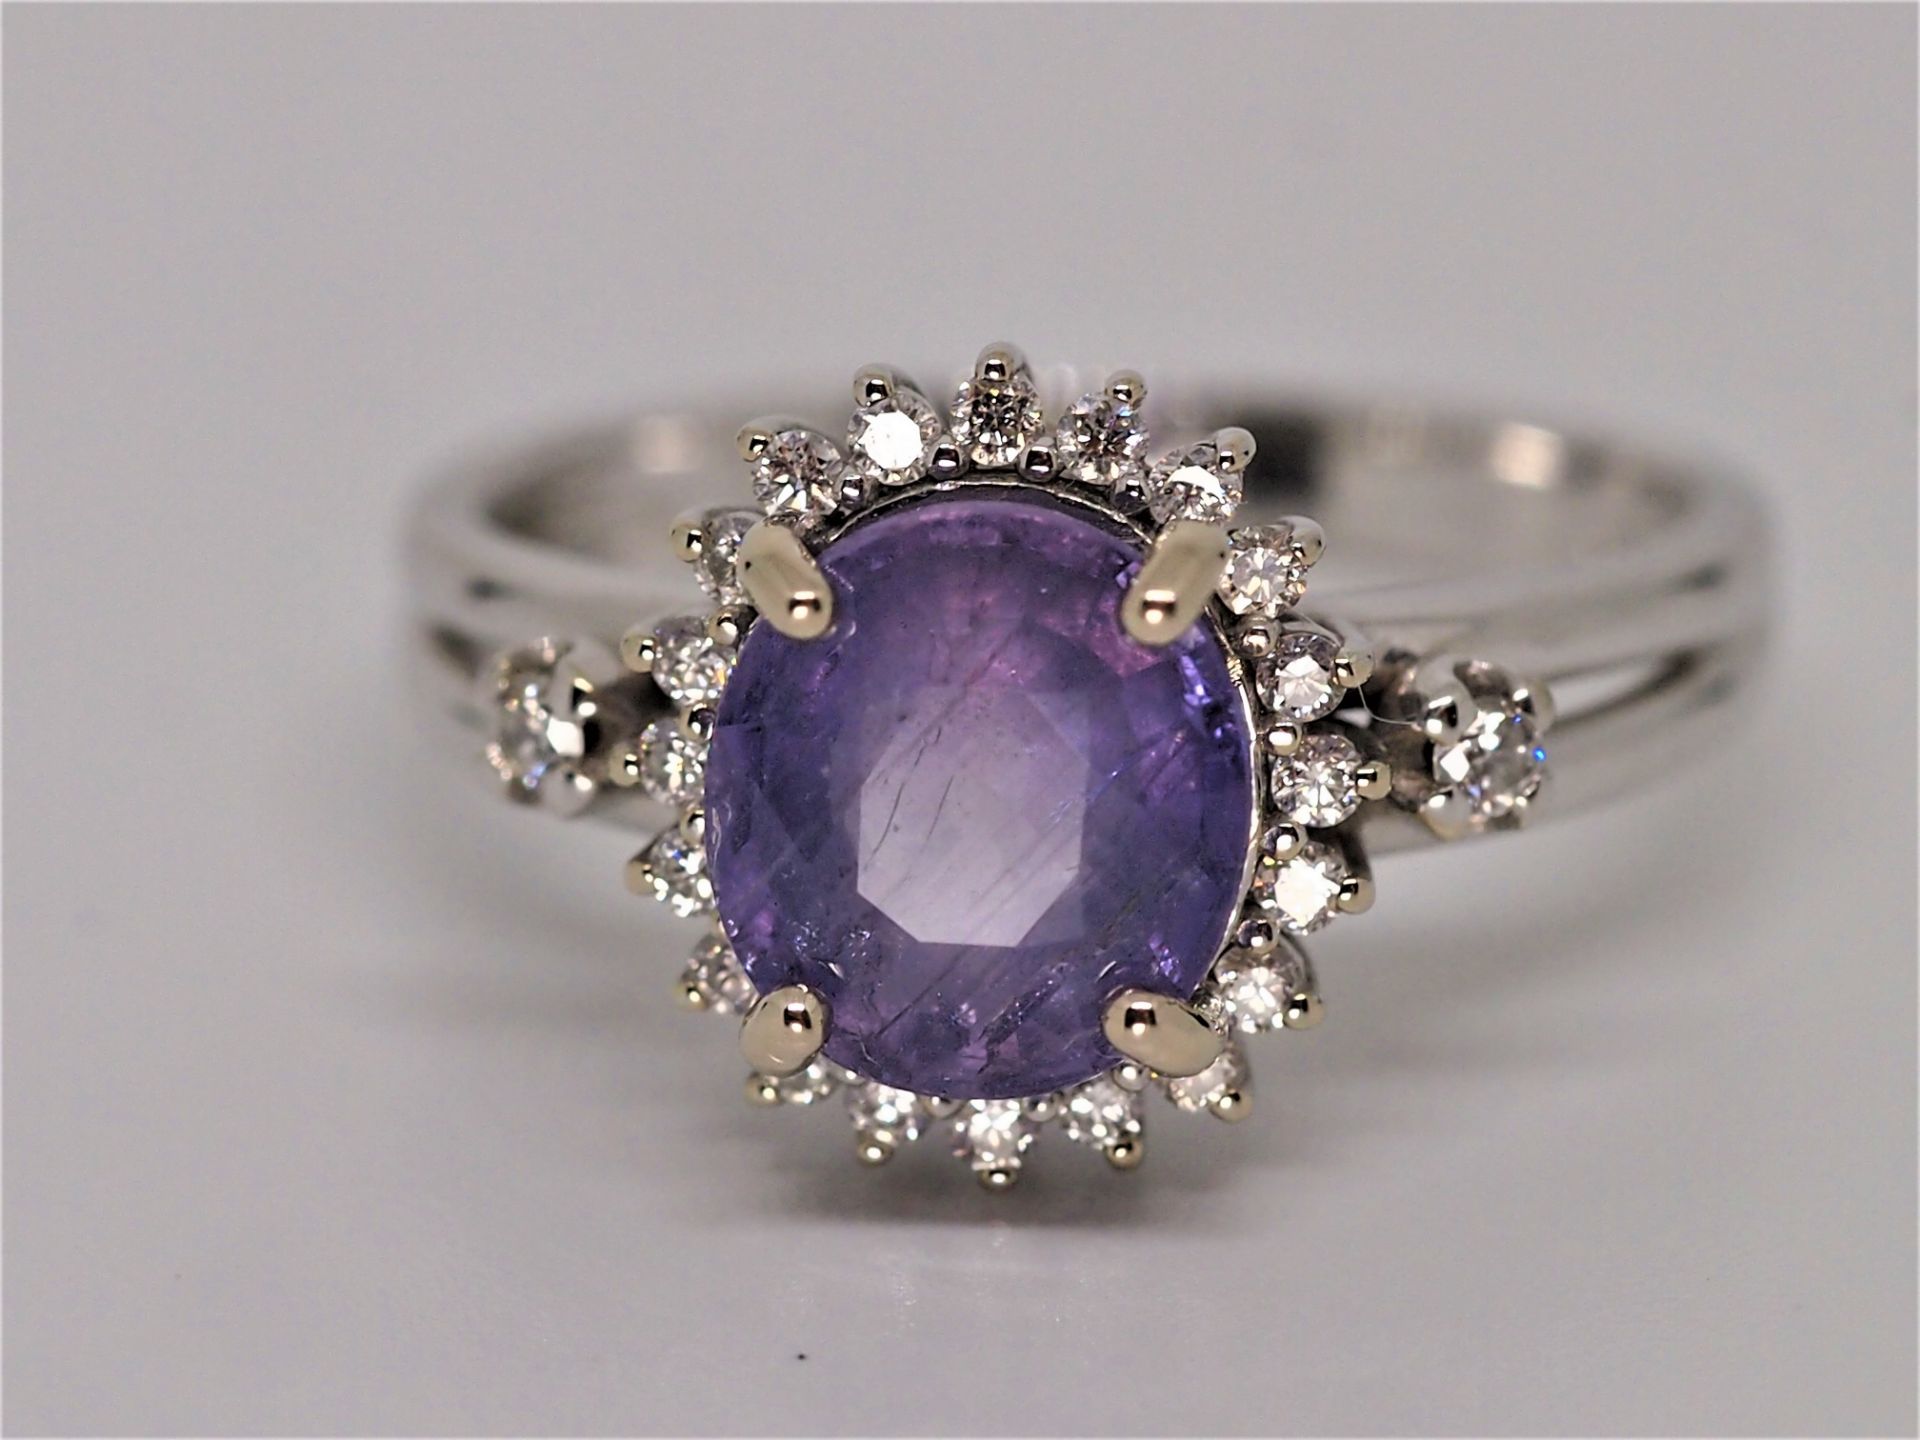 Certified 2.52 ct Untreated Colour Change Sapphire and Diamonds 18K Gold Ring - Image 4 of 8